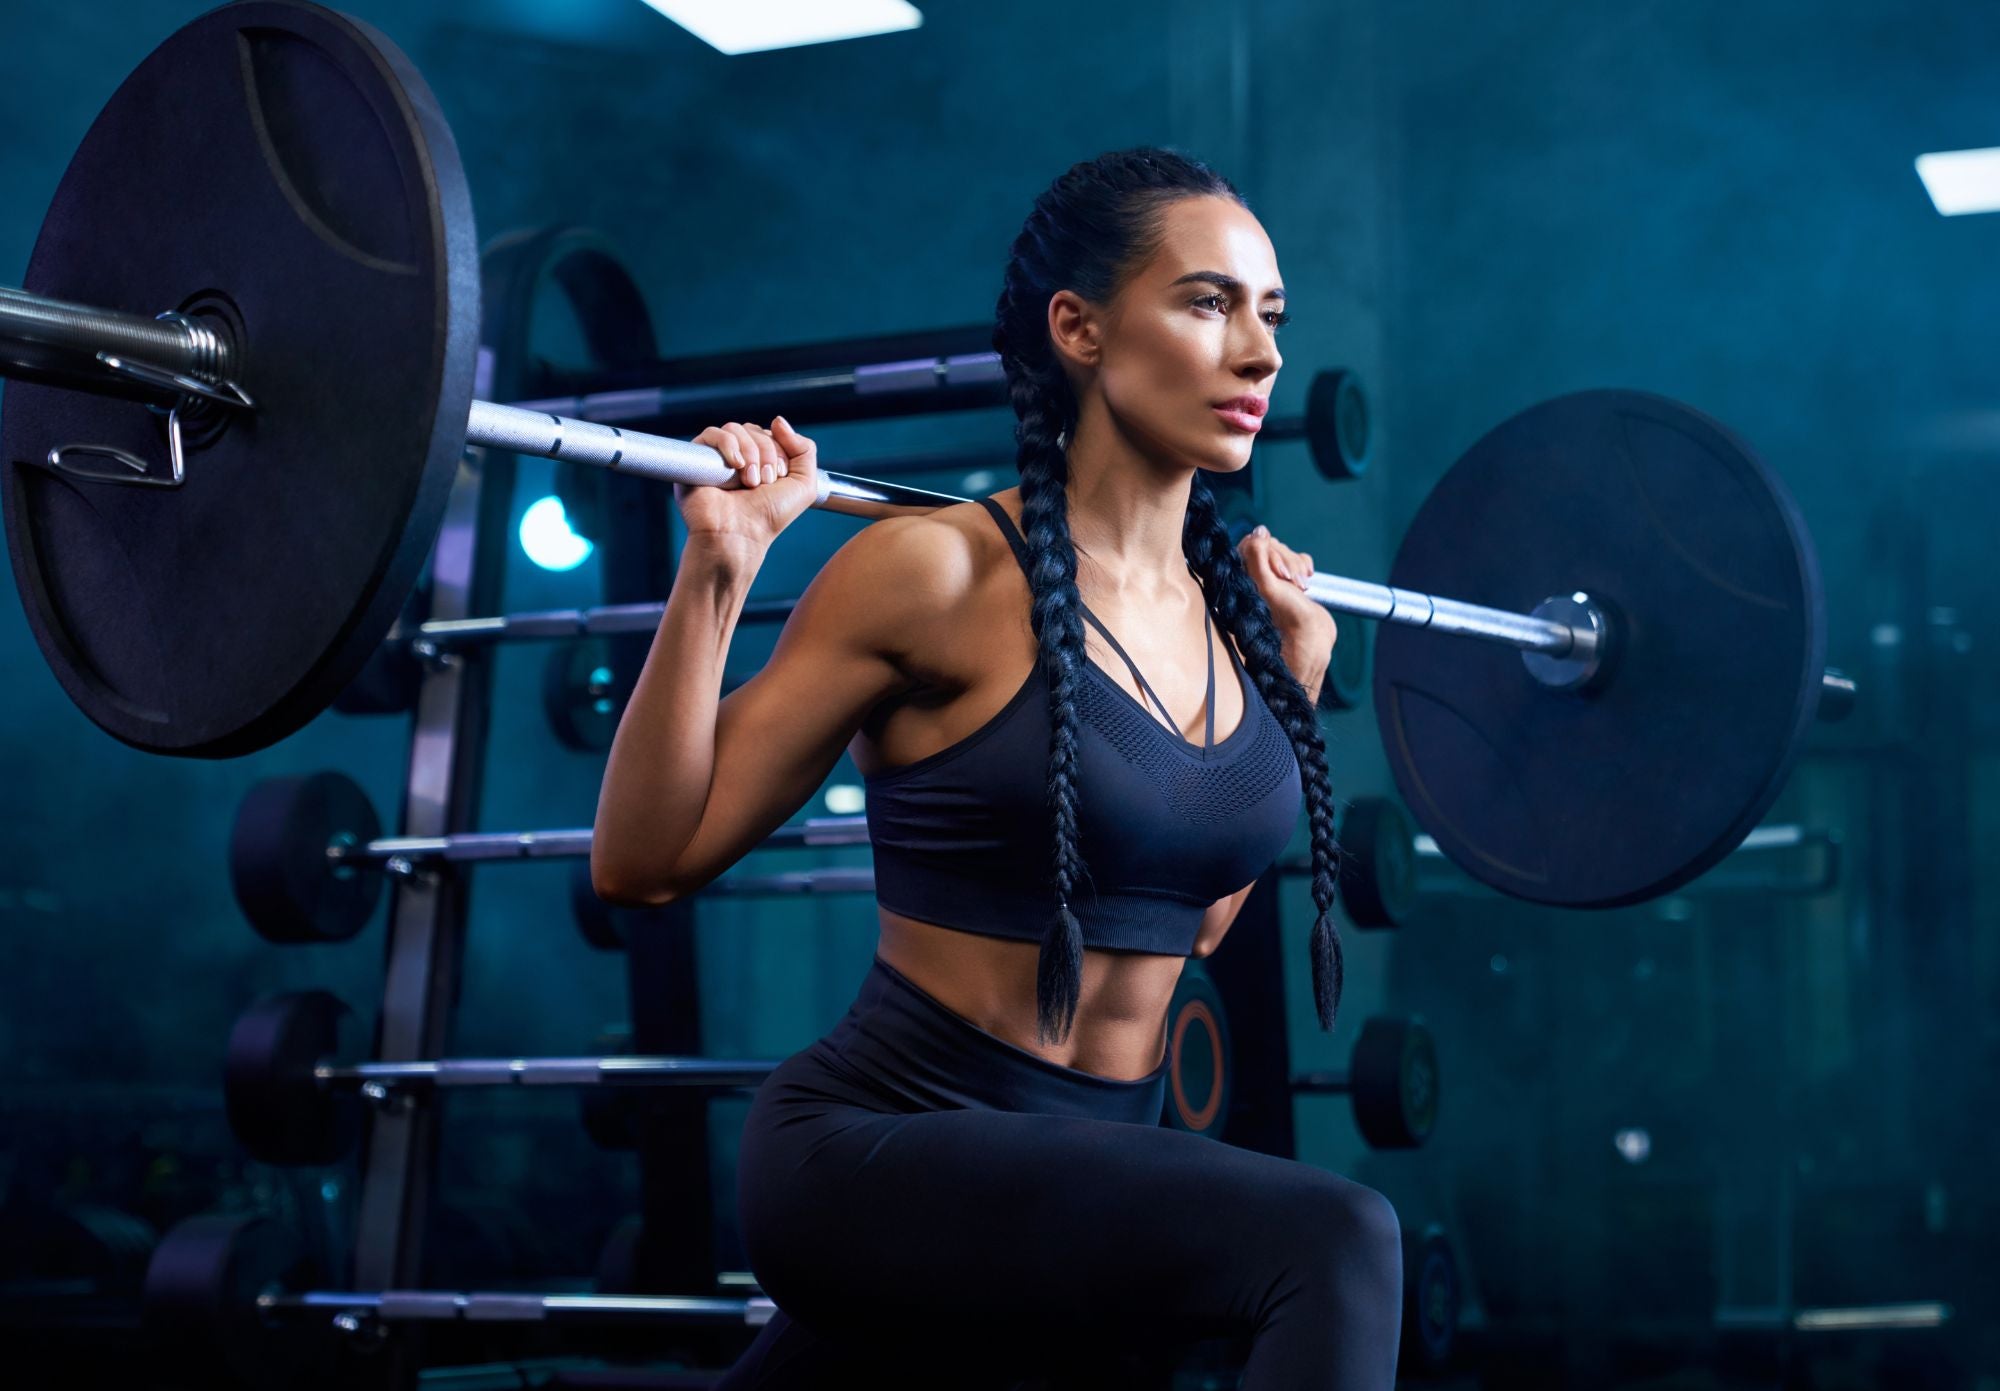 Workout Wednesday: The Benefits of Strength Training for Women